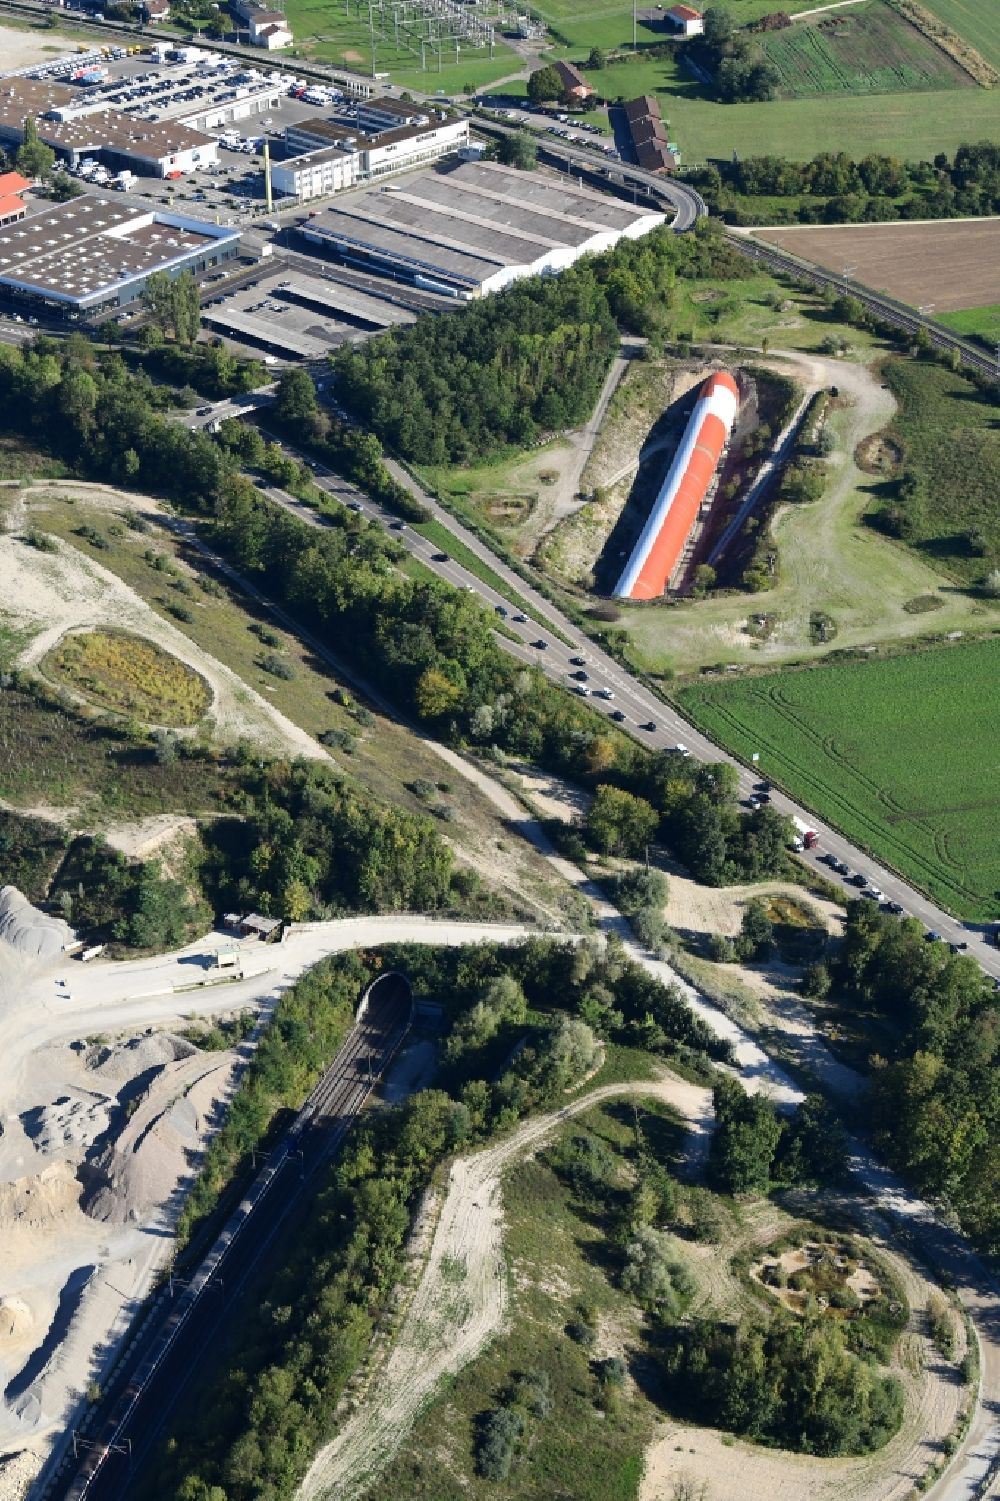 Aerial photograph Muttenz - Track connections to the railway tunnel Adlertunnel in Muttenz in the canton Basel-Landschaft, Switzerland